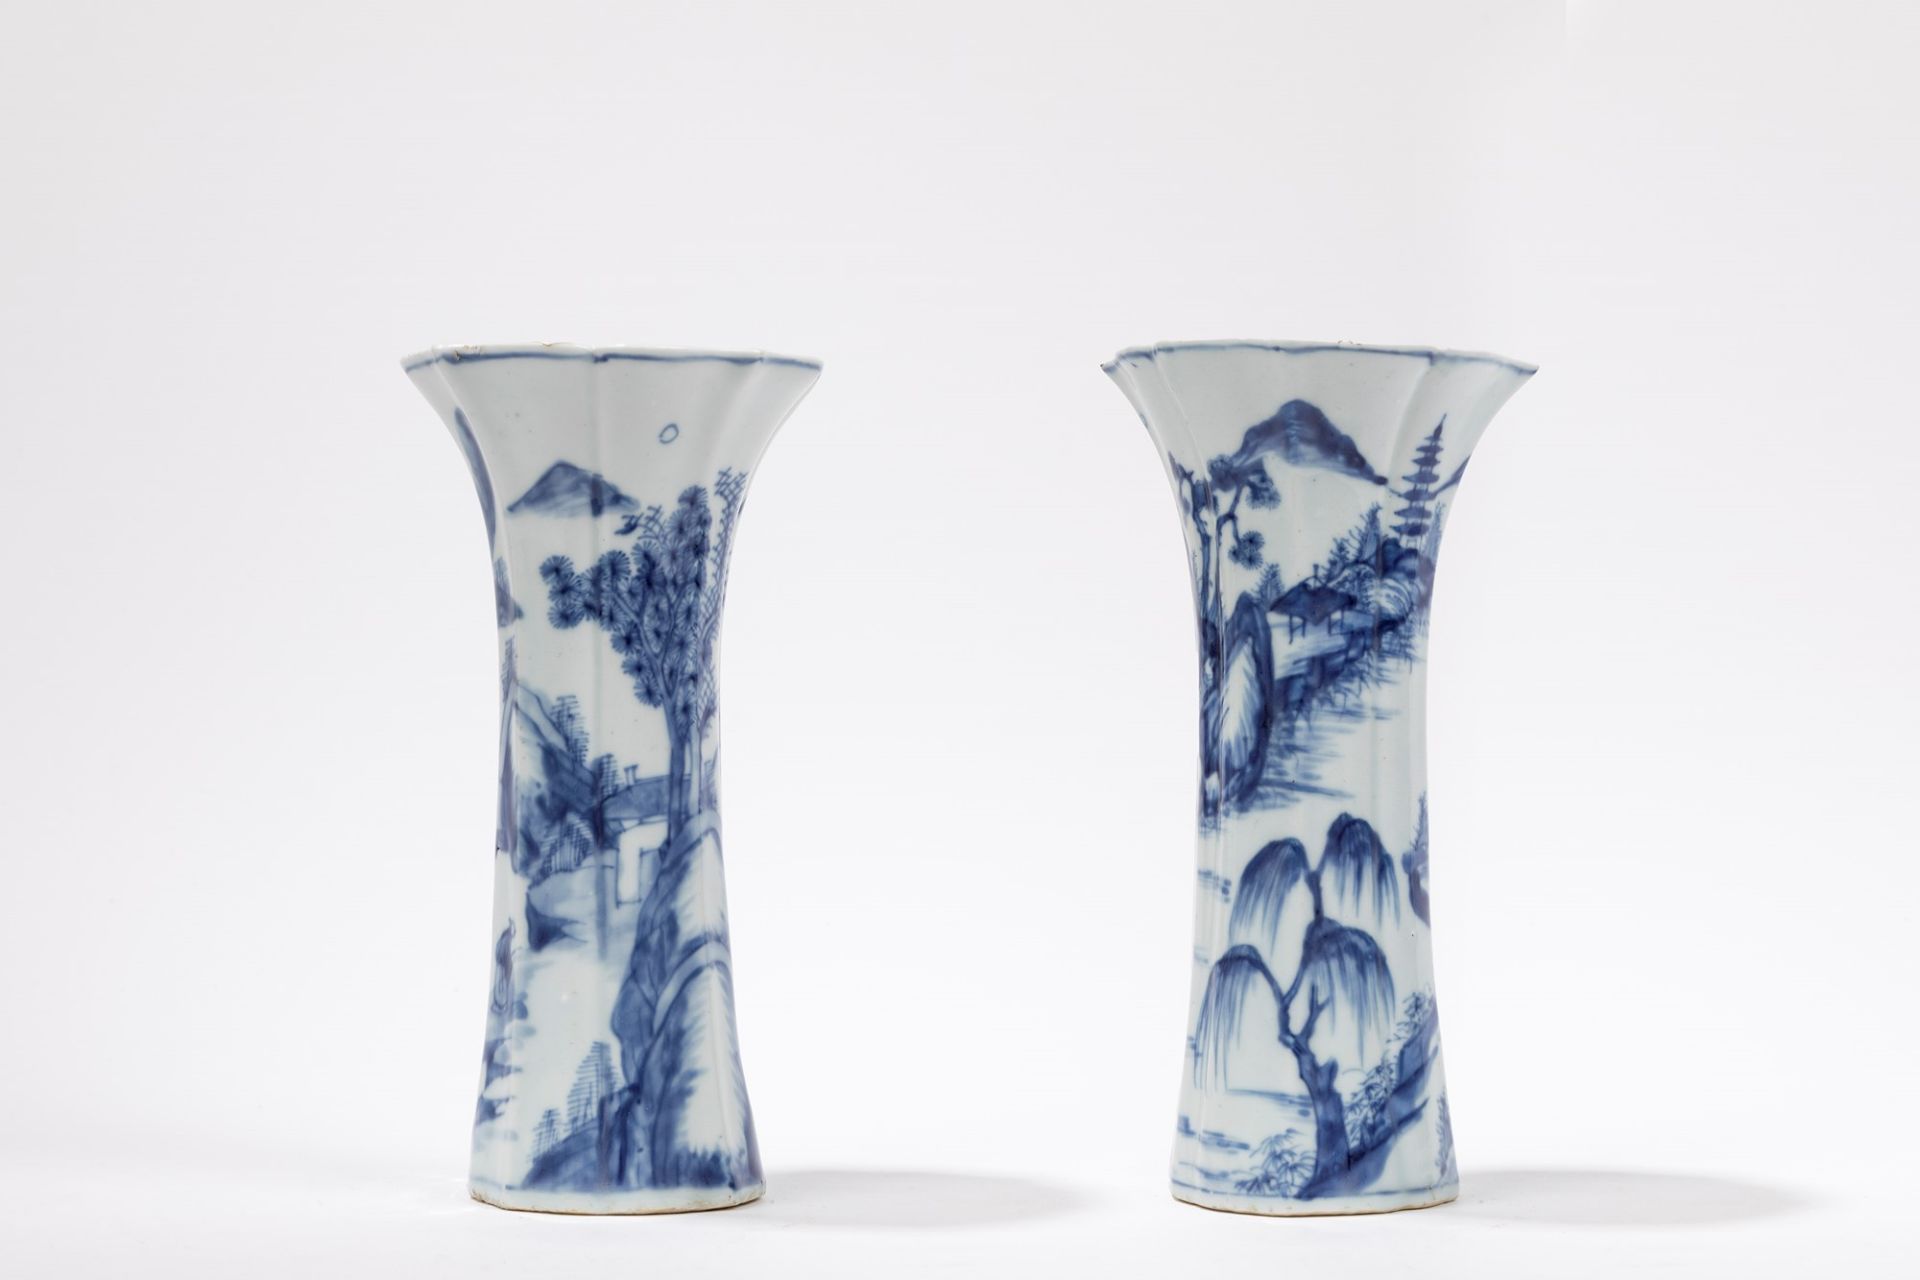 A PAIR OF BLUE AND WHITE VASES, China, Qing dynasty, 18th century